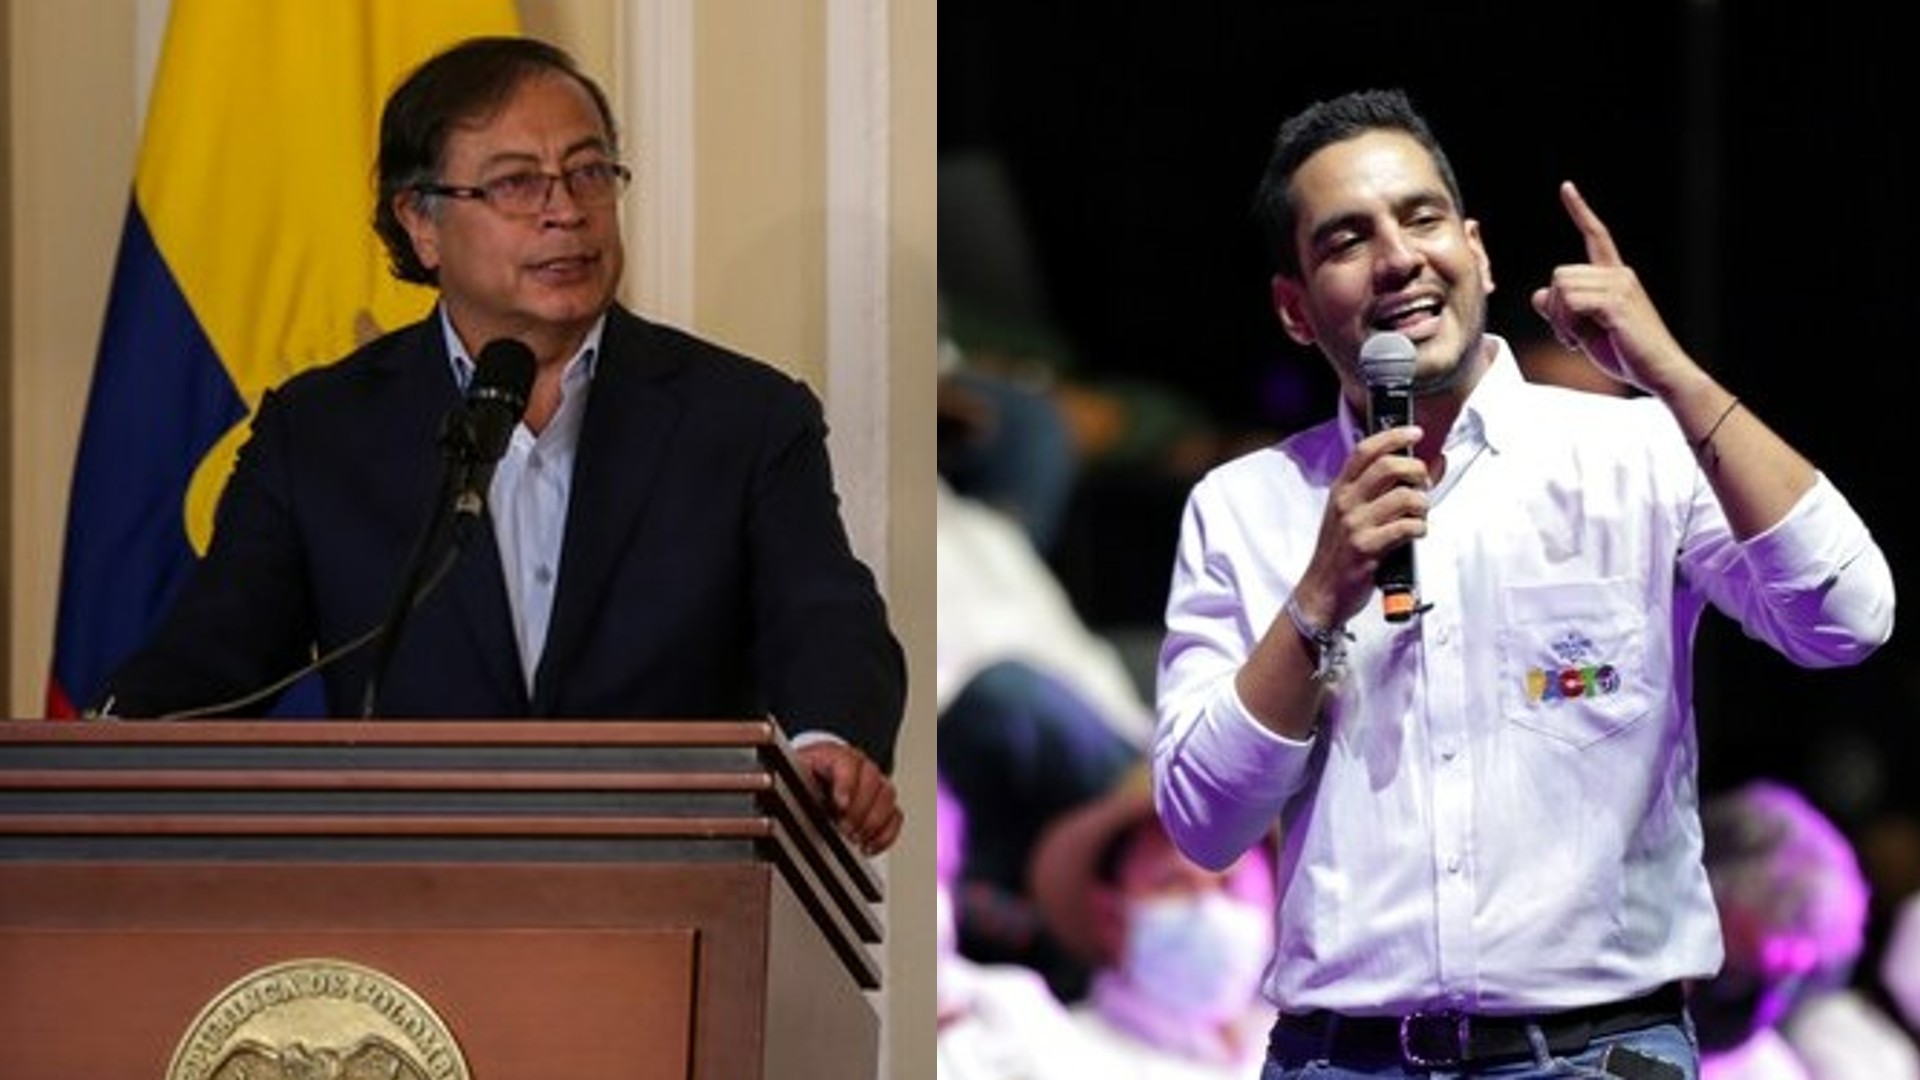 President Petro asserted that the senator would exhibit personality issues and arrogance that would make him notorious by being elected senator.  Photos: Colprensa.